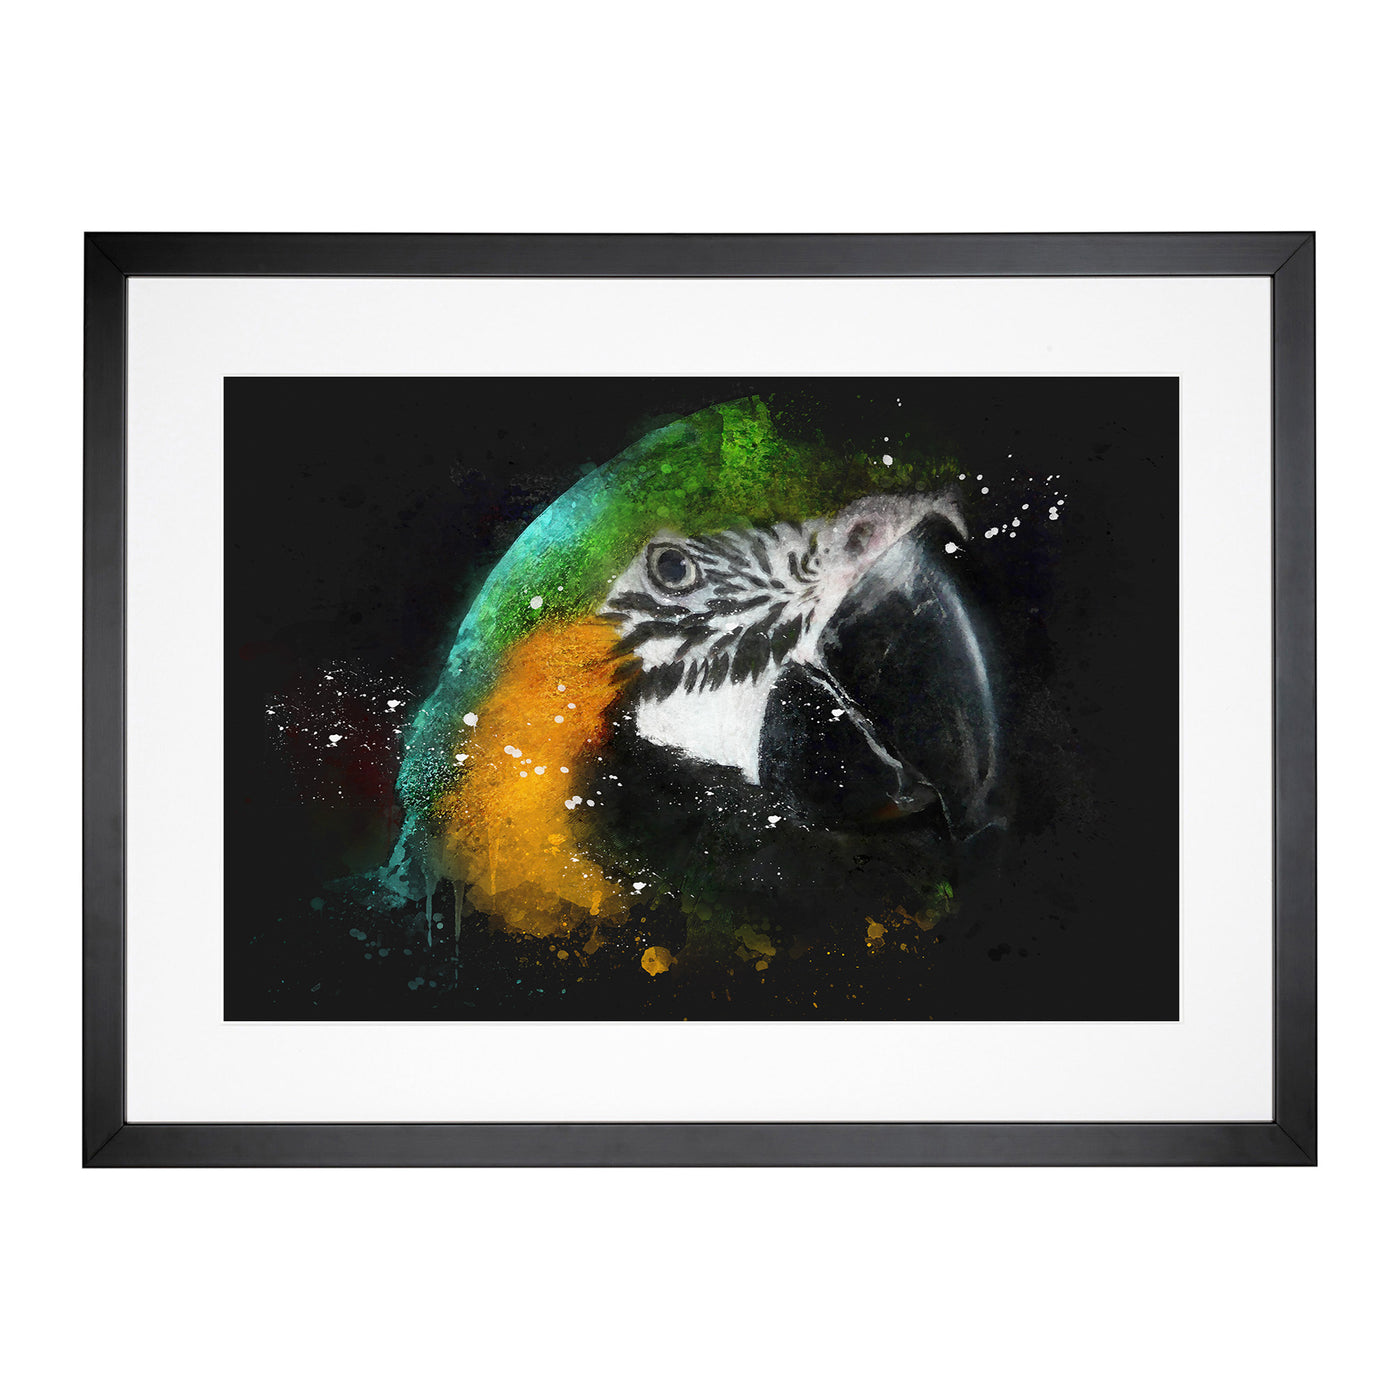 Yellow & Green Macaw Parrot